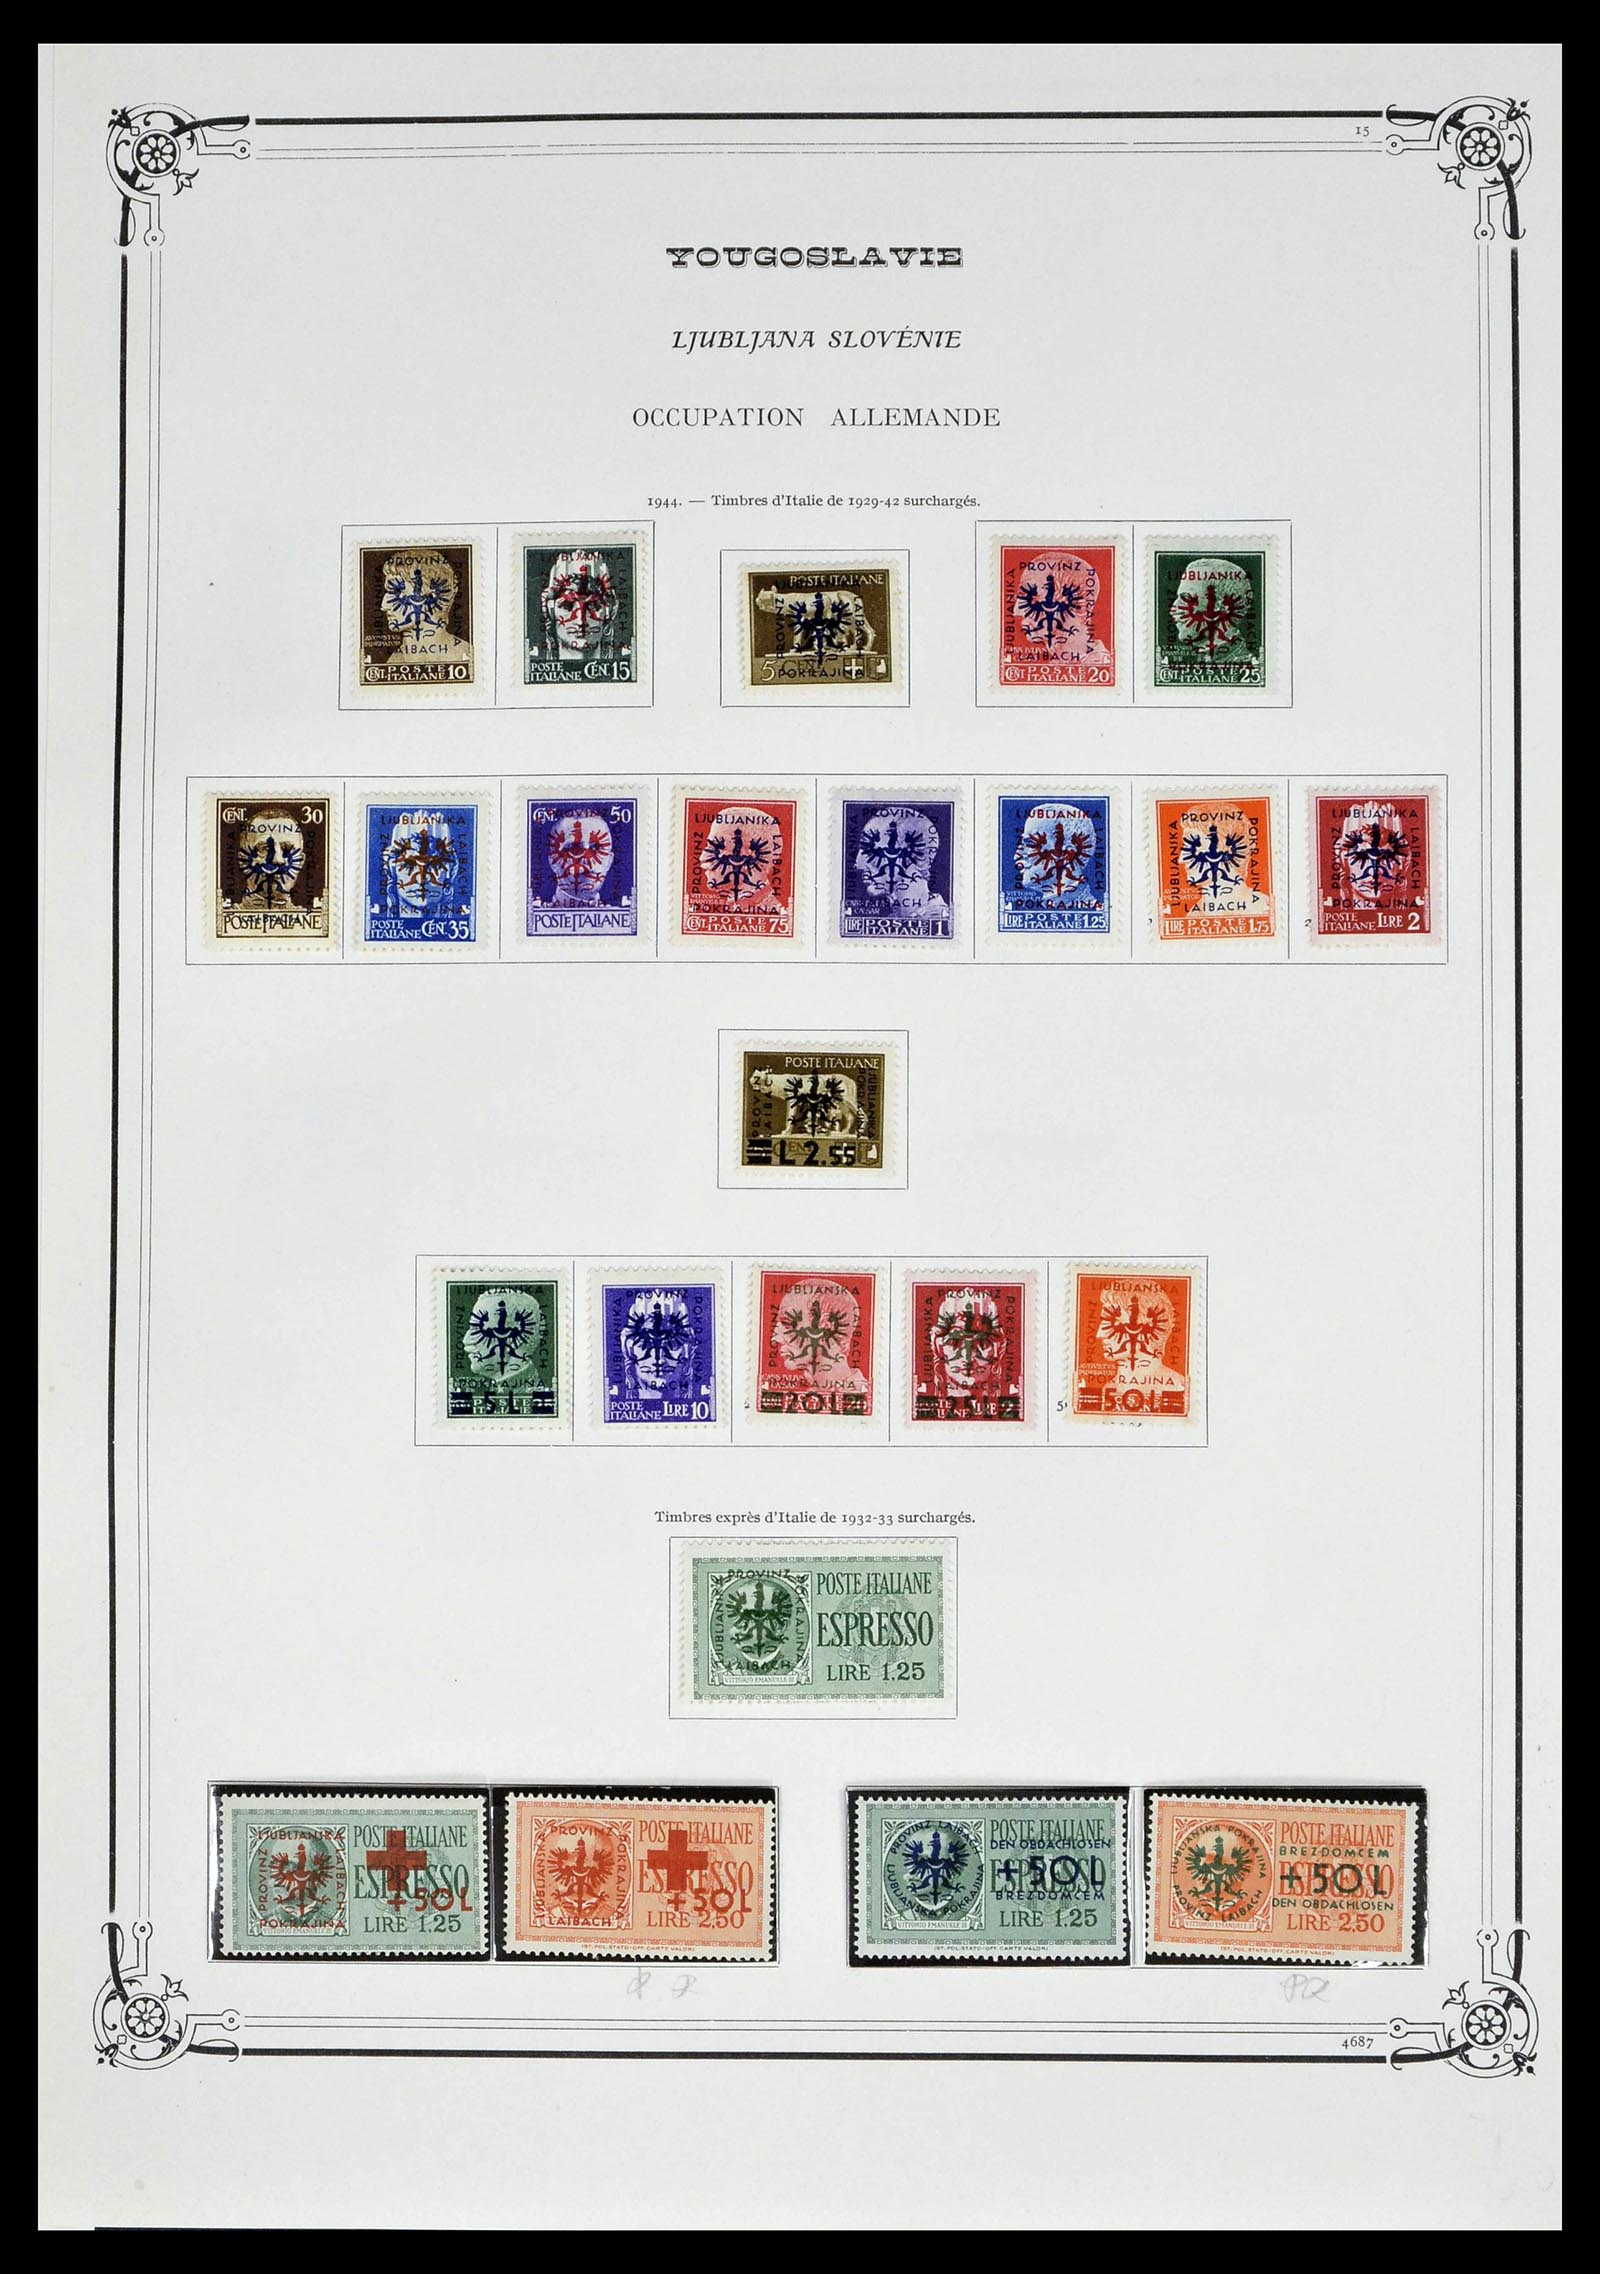 39290 0004 - Stamp collection 39290 Italian and German occupation of Lubljana 1941-19